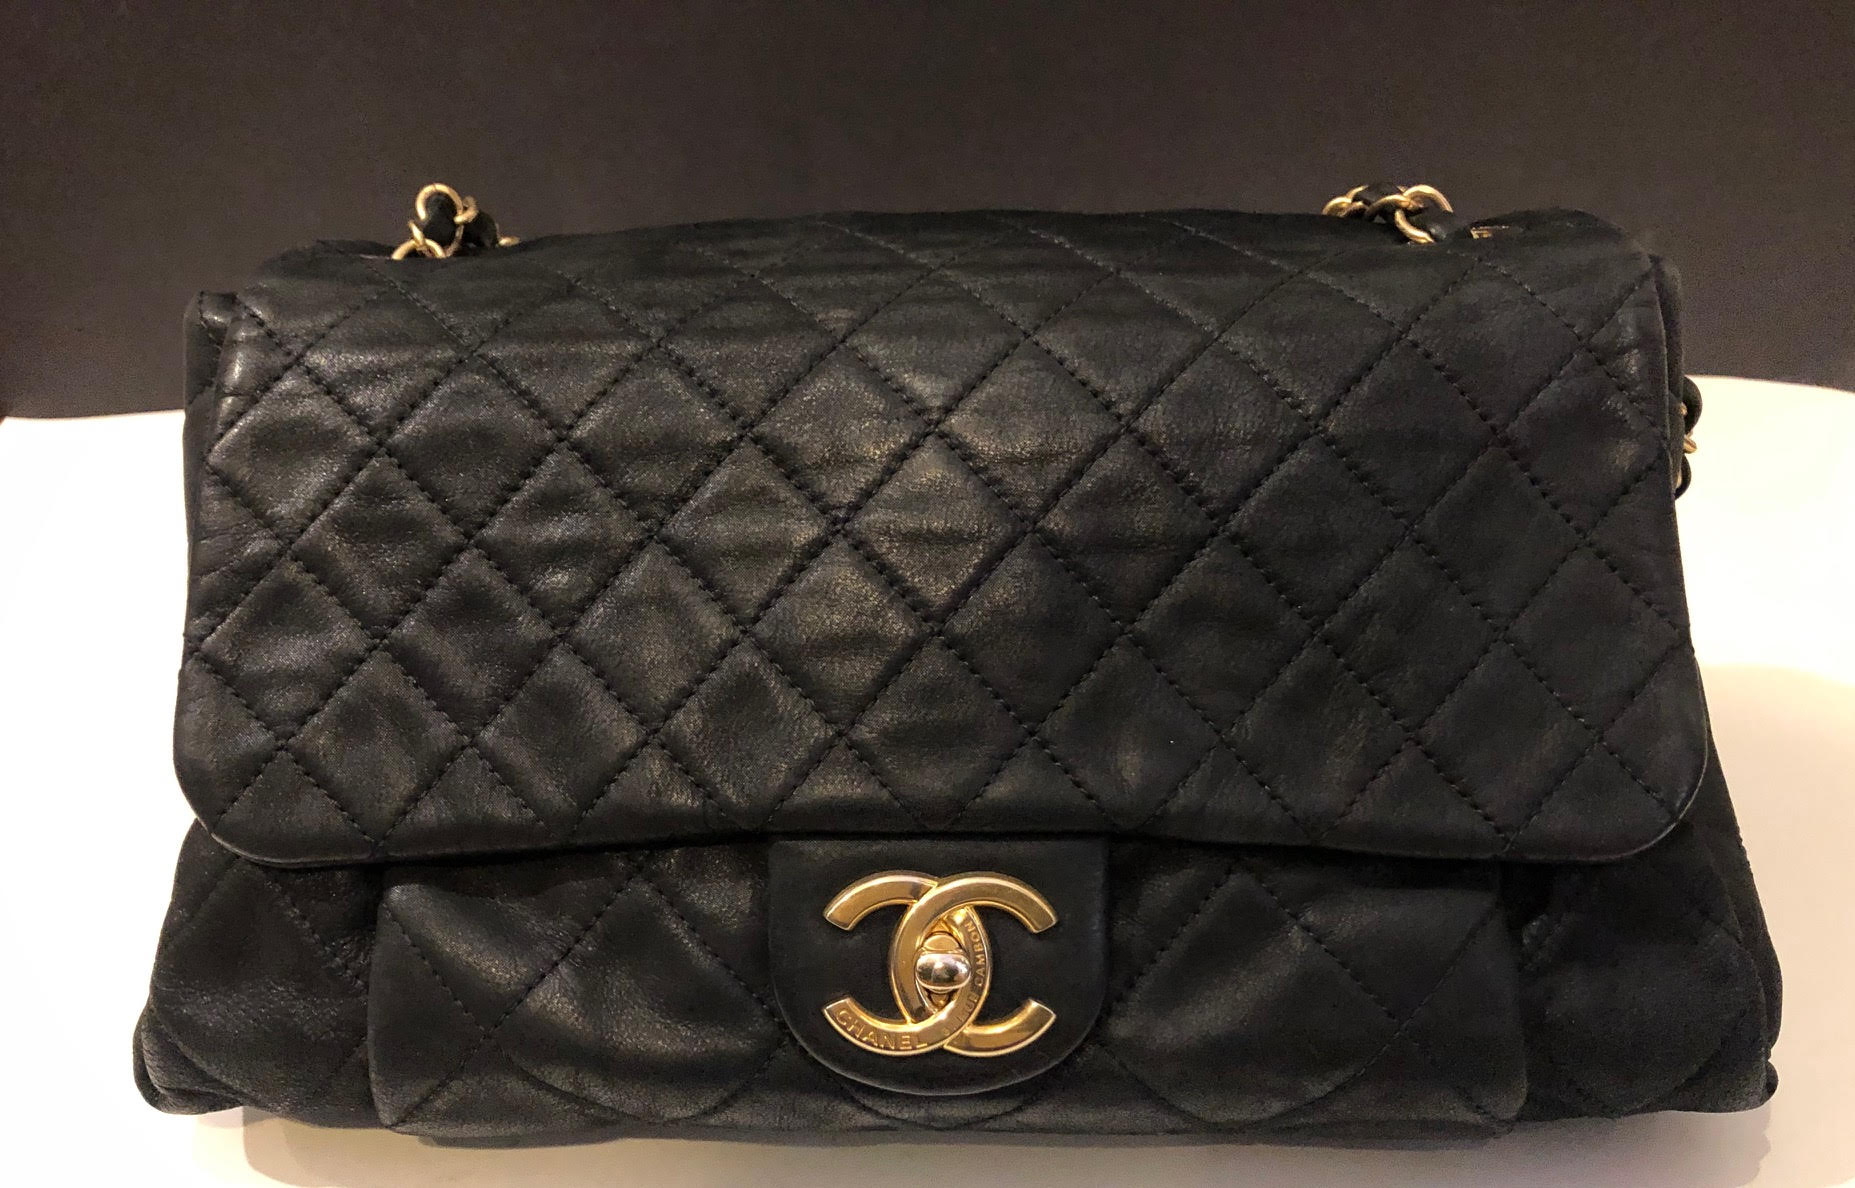 CHANEL Handbag Black Quilted Reissue 31 Rue Cambon Flap Bag - Chelsea  Vintage Couture